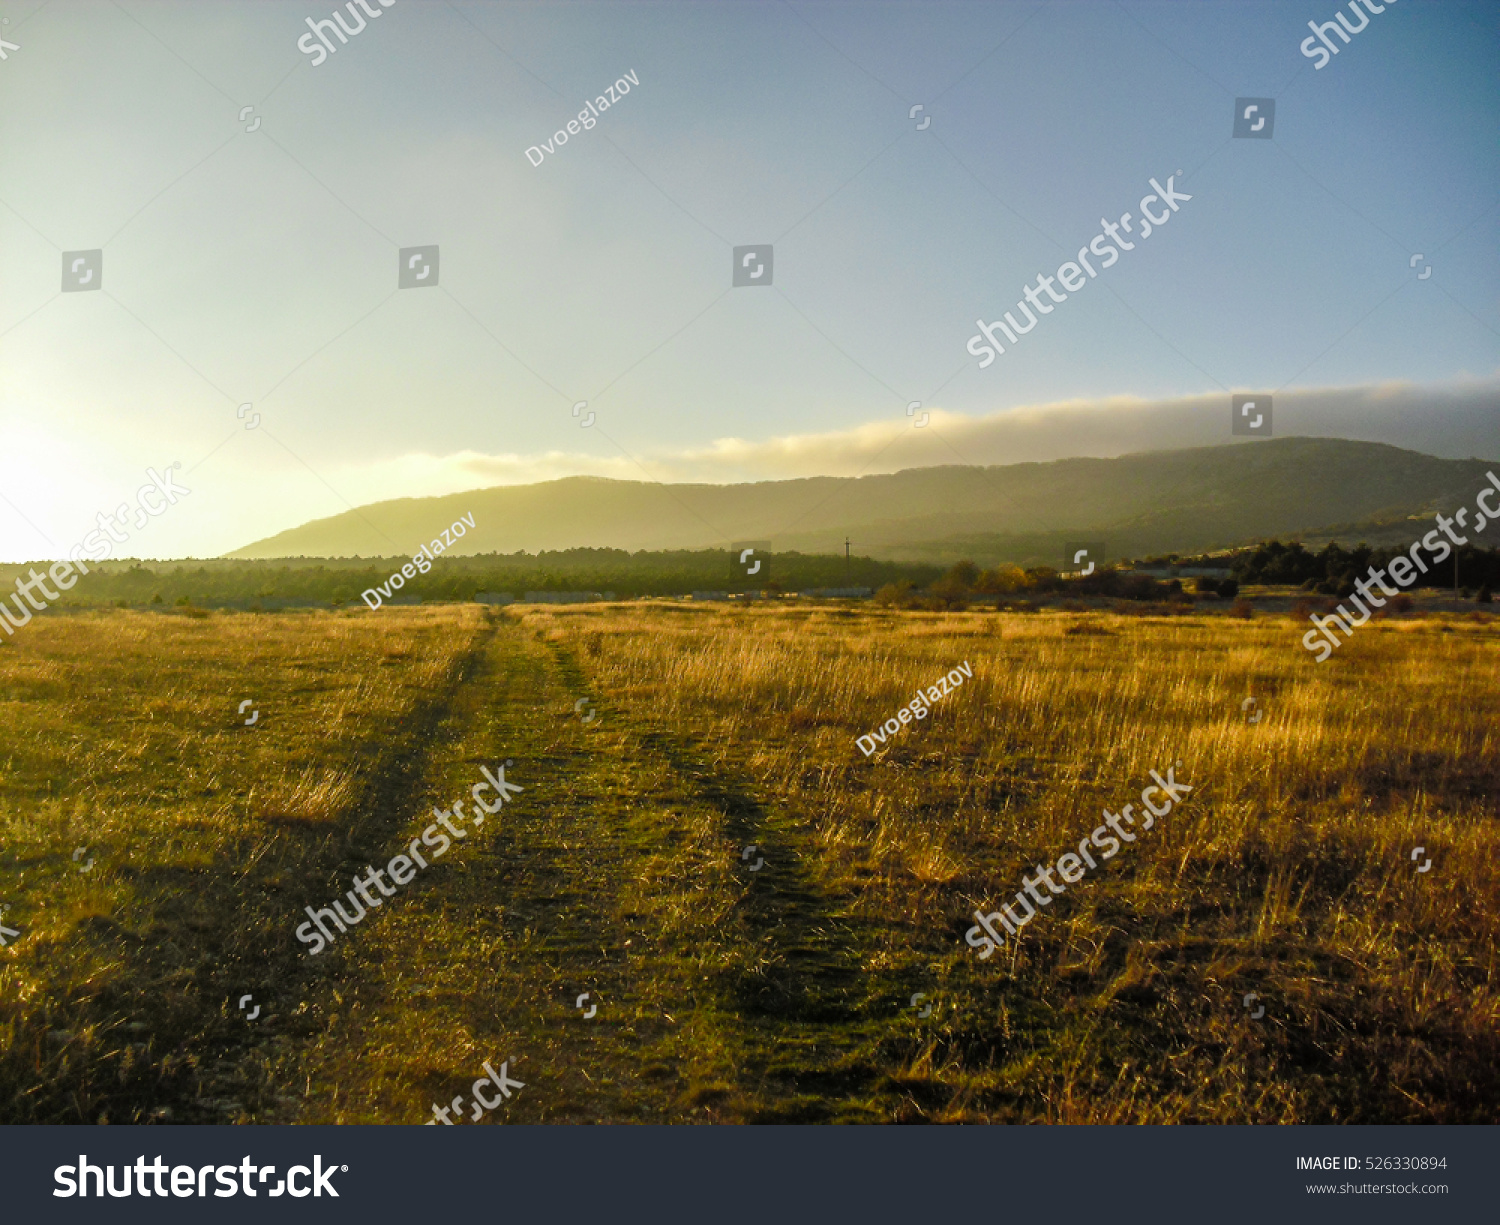 Grassy road to the forest. Sunset landscape. Dry grass field. #526330894